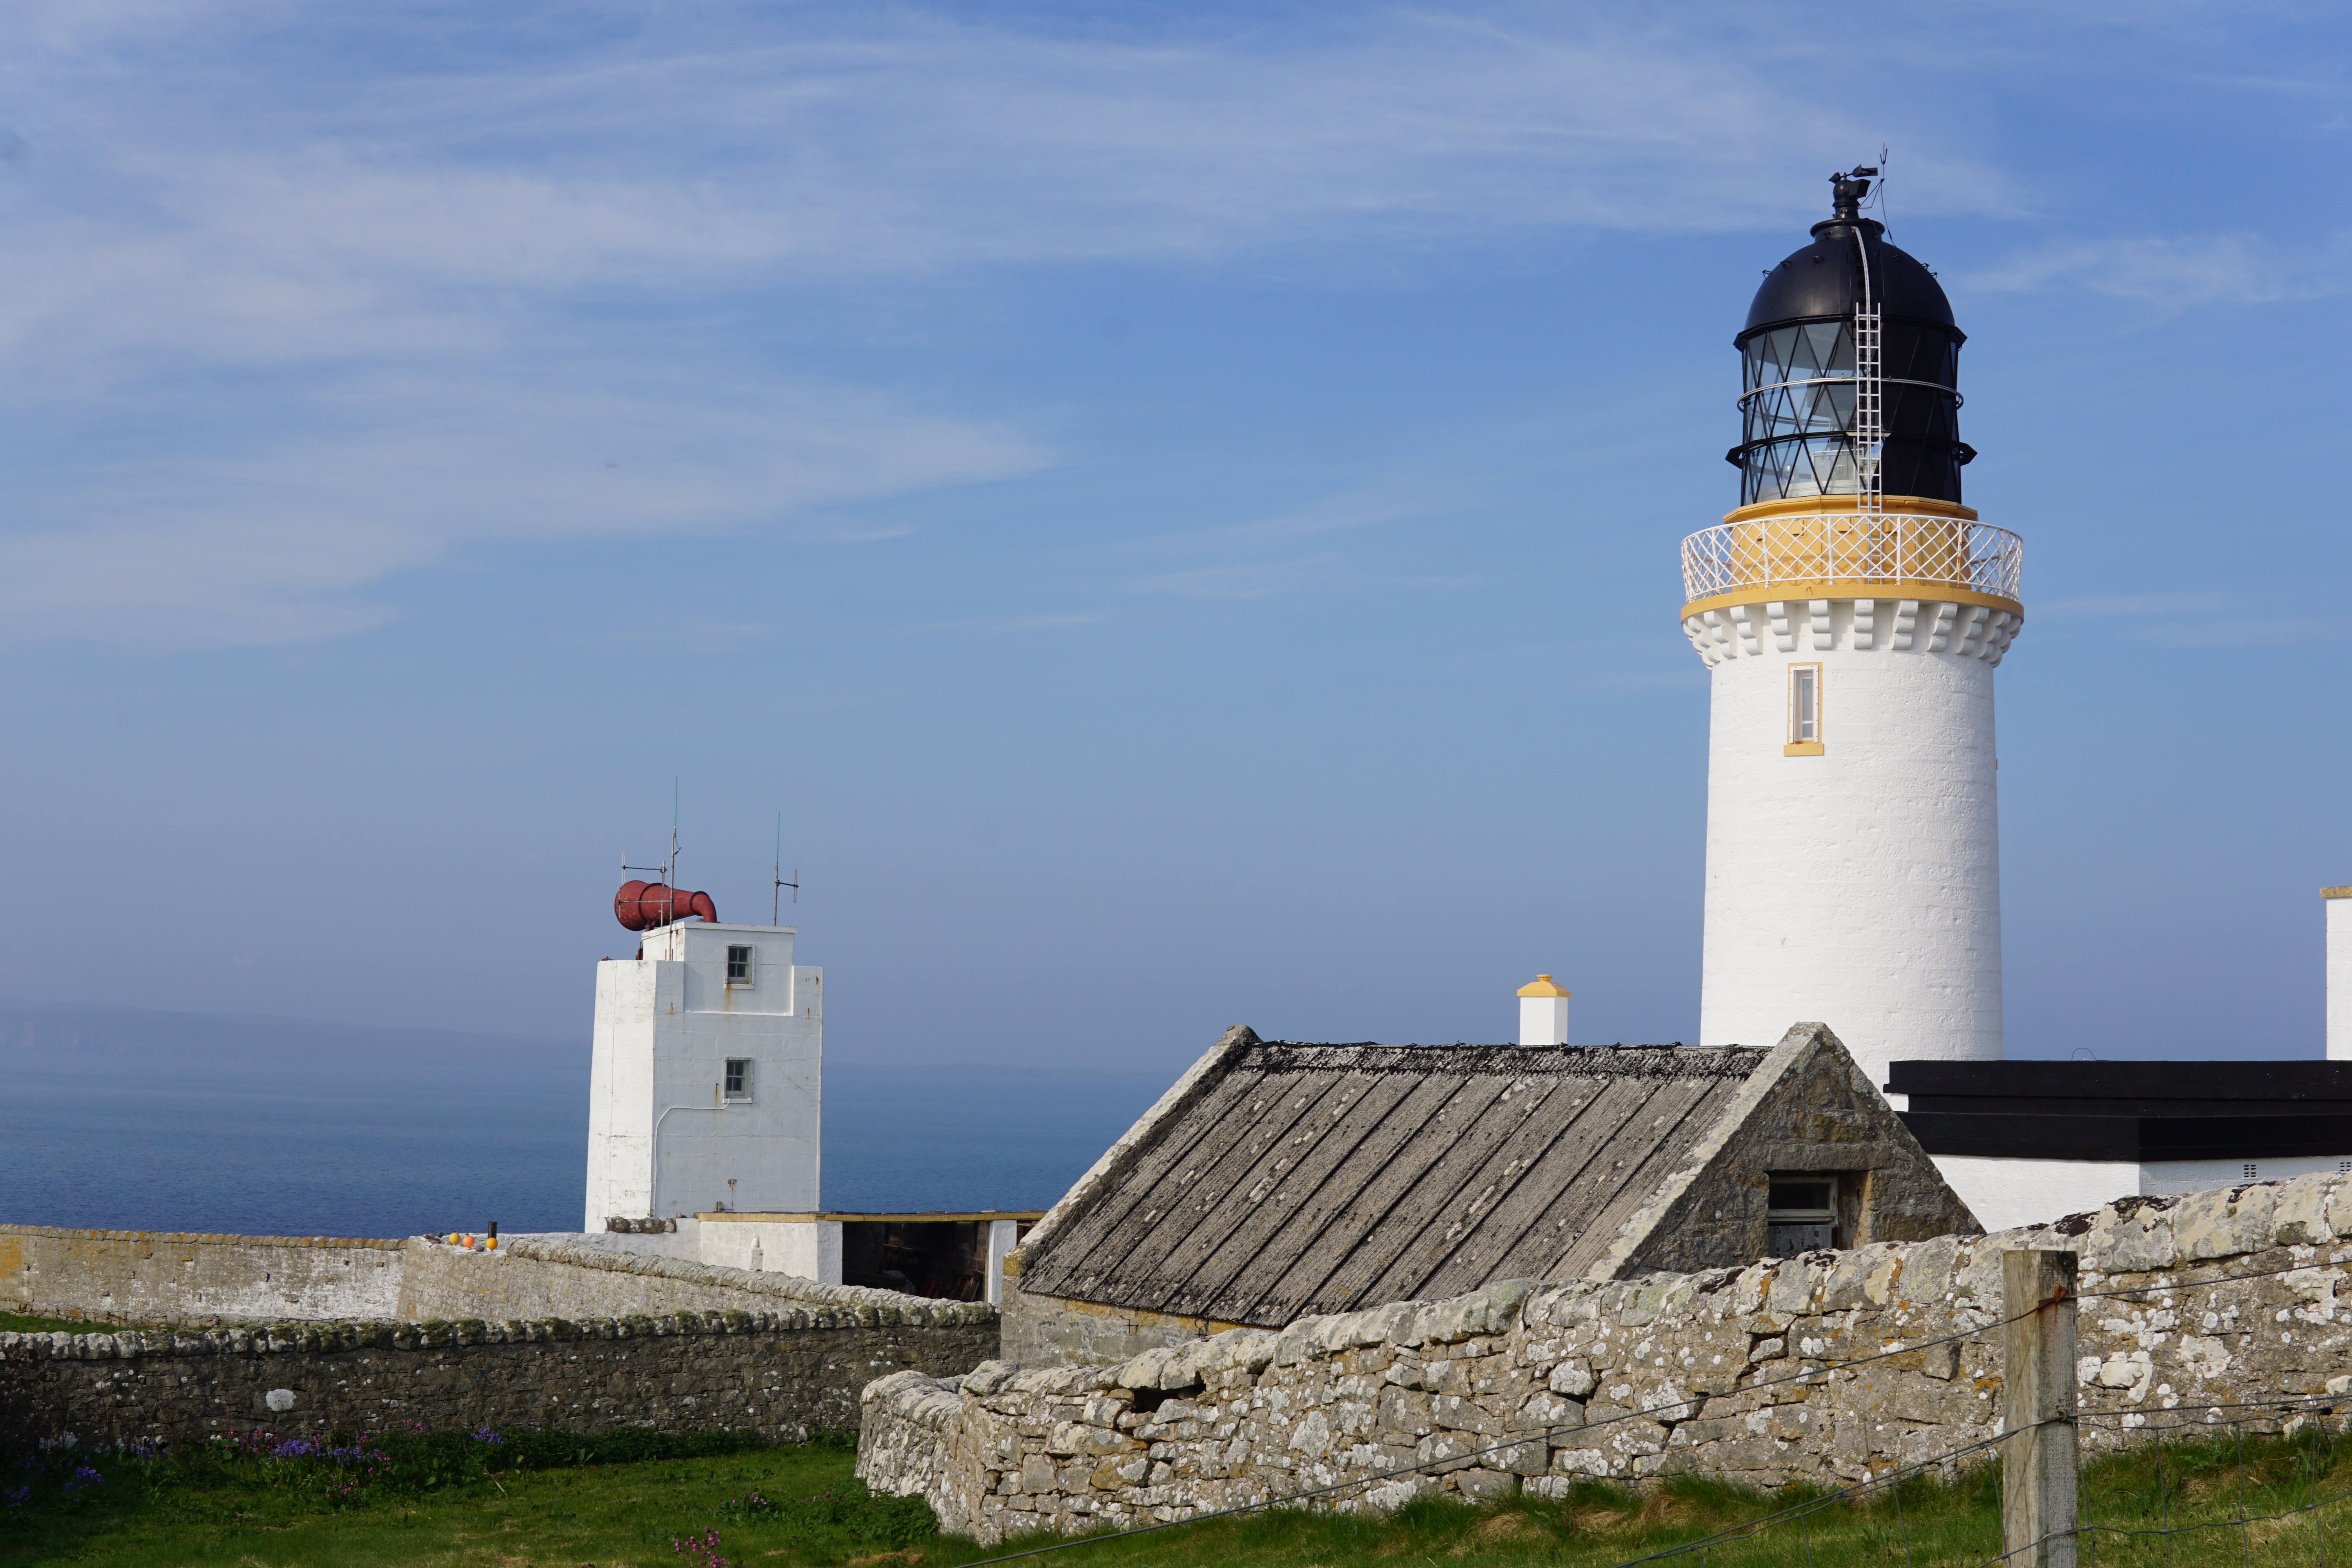 Lighthouse located at very top of NC500. Blue sky in distance.